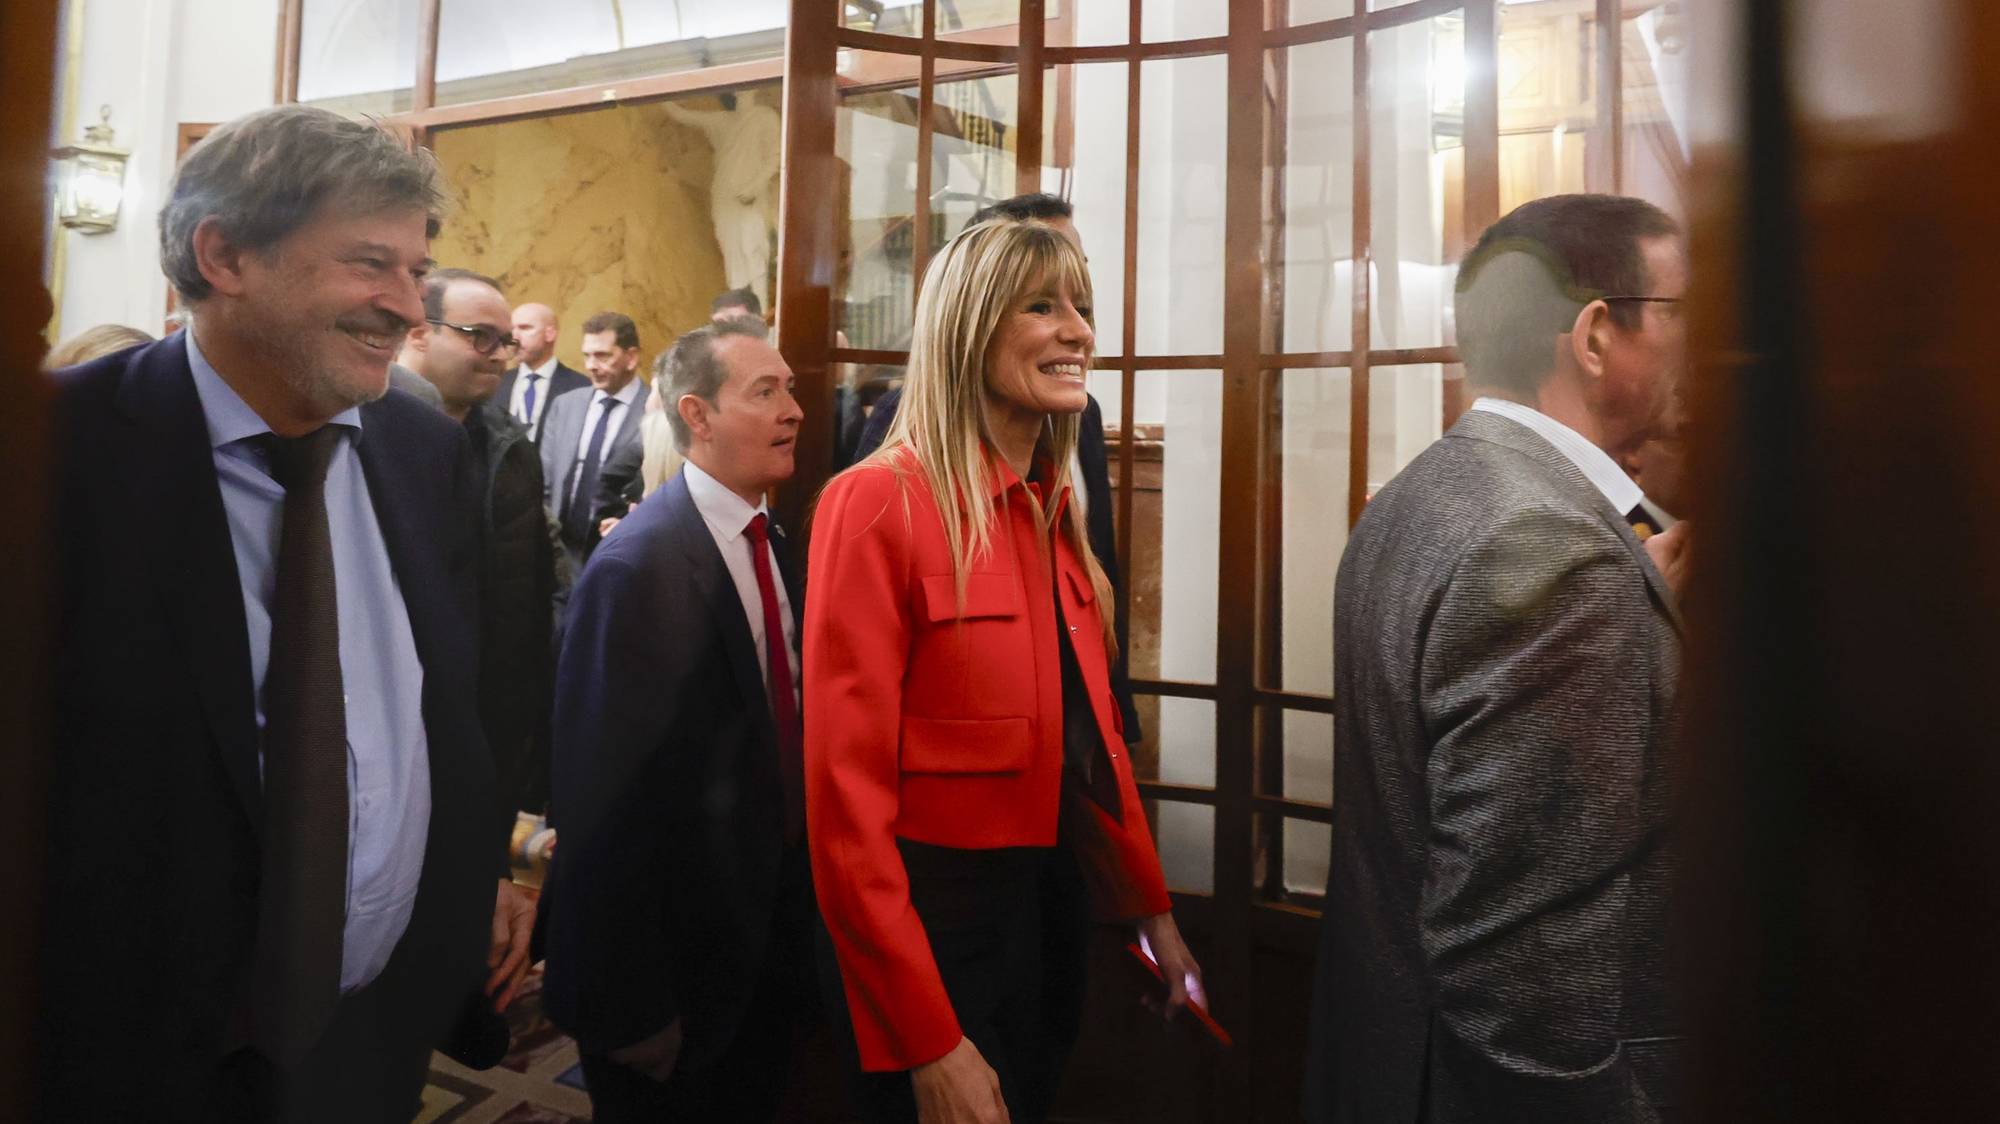 epa10978369 Begona Gomez (C), wife of Spanish Prime Minister-elect Pedro Sanchez (unseen), smiles as she leaves the building after Sanchez won the investiture&#039;s vote by an absolute majority at the Congress of Deputies, in Madrid, Spain, 16 November 2023. Acting Prime Minister got enough support to be re-elected as he achieved 179 votes with the support of Catalan and Basque pro-independent parties, among others, after he reached several agreements, including one agreement with Catalan Junts per Catalunya party for his leader Carles Puigdemont, residing in Belgium, is to be amnestied for his involvement in the unlawful independence referendum held in Catalonia in 2017, event that is causing several protests.  EPA/Javier Lizon